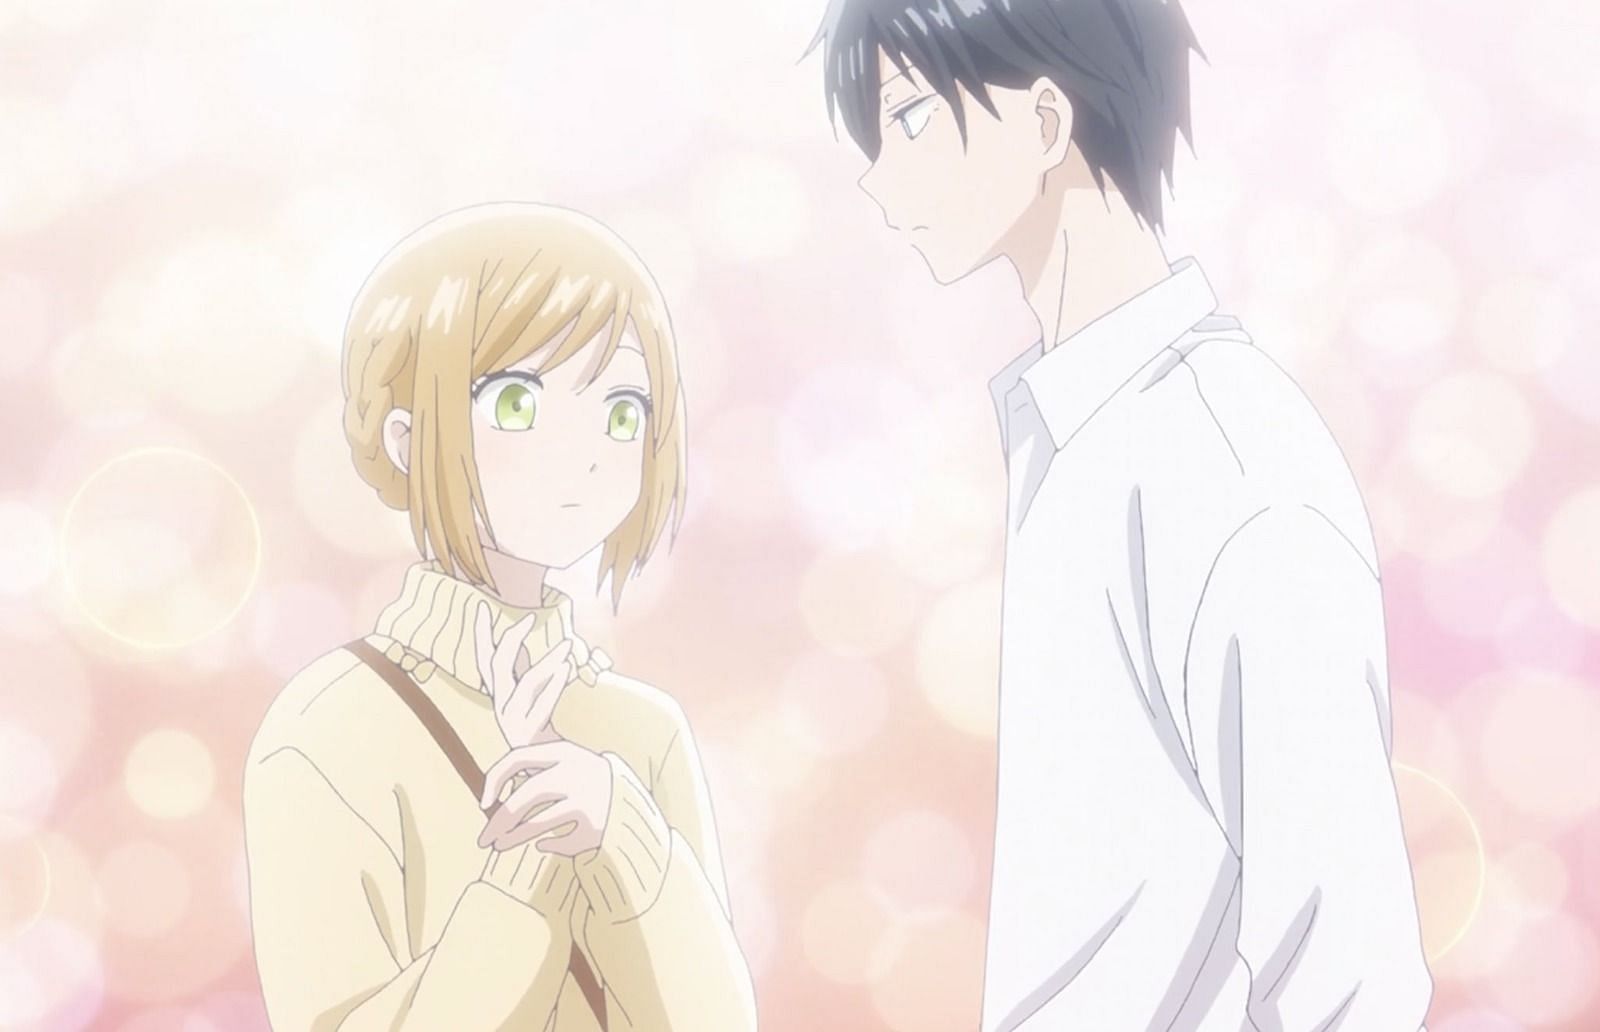 My Love Story with Yamada-kun at Lv999 episode 8: Release date